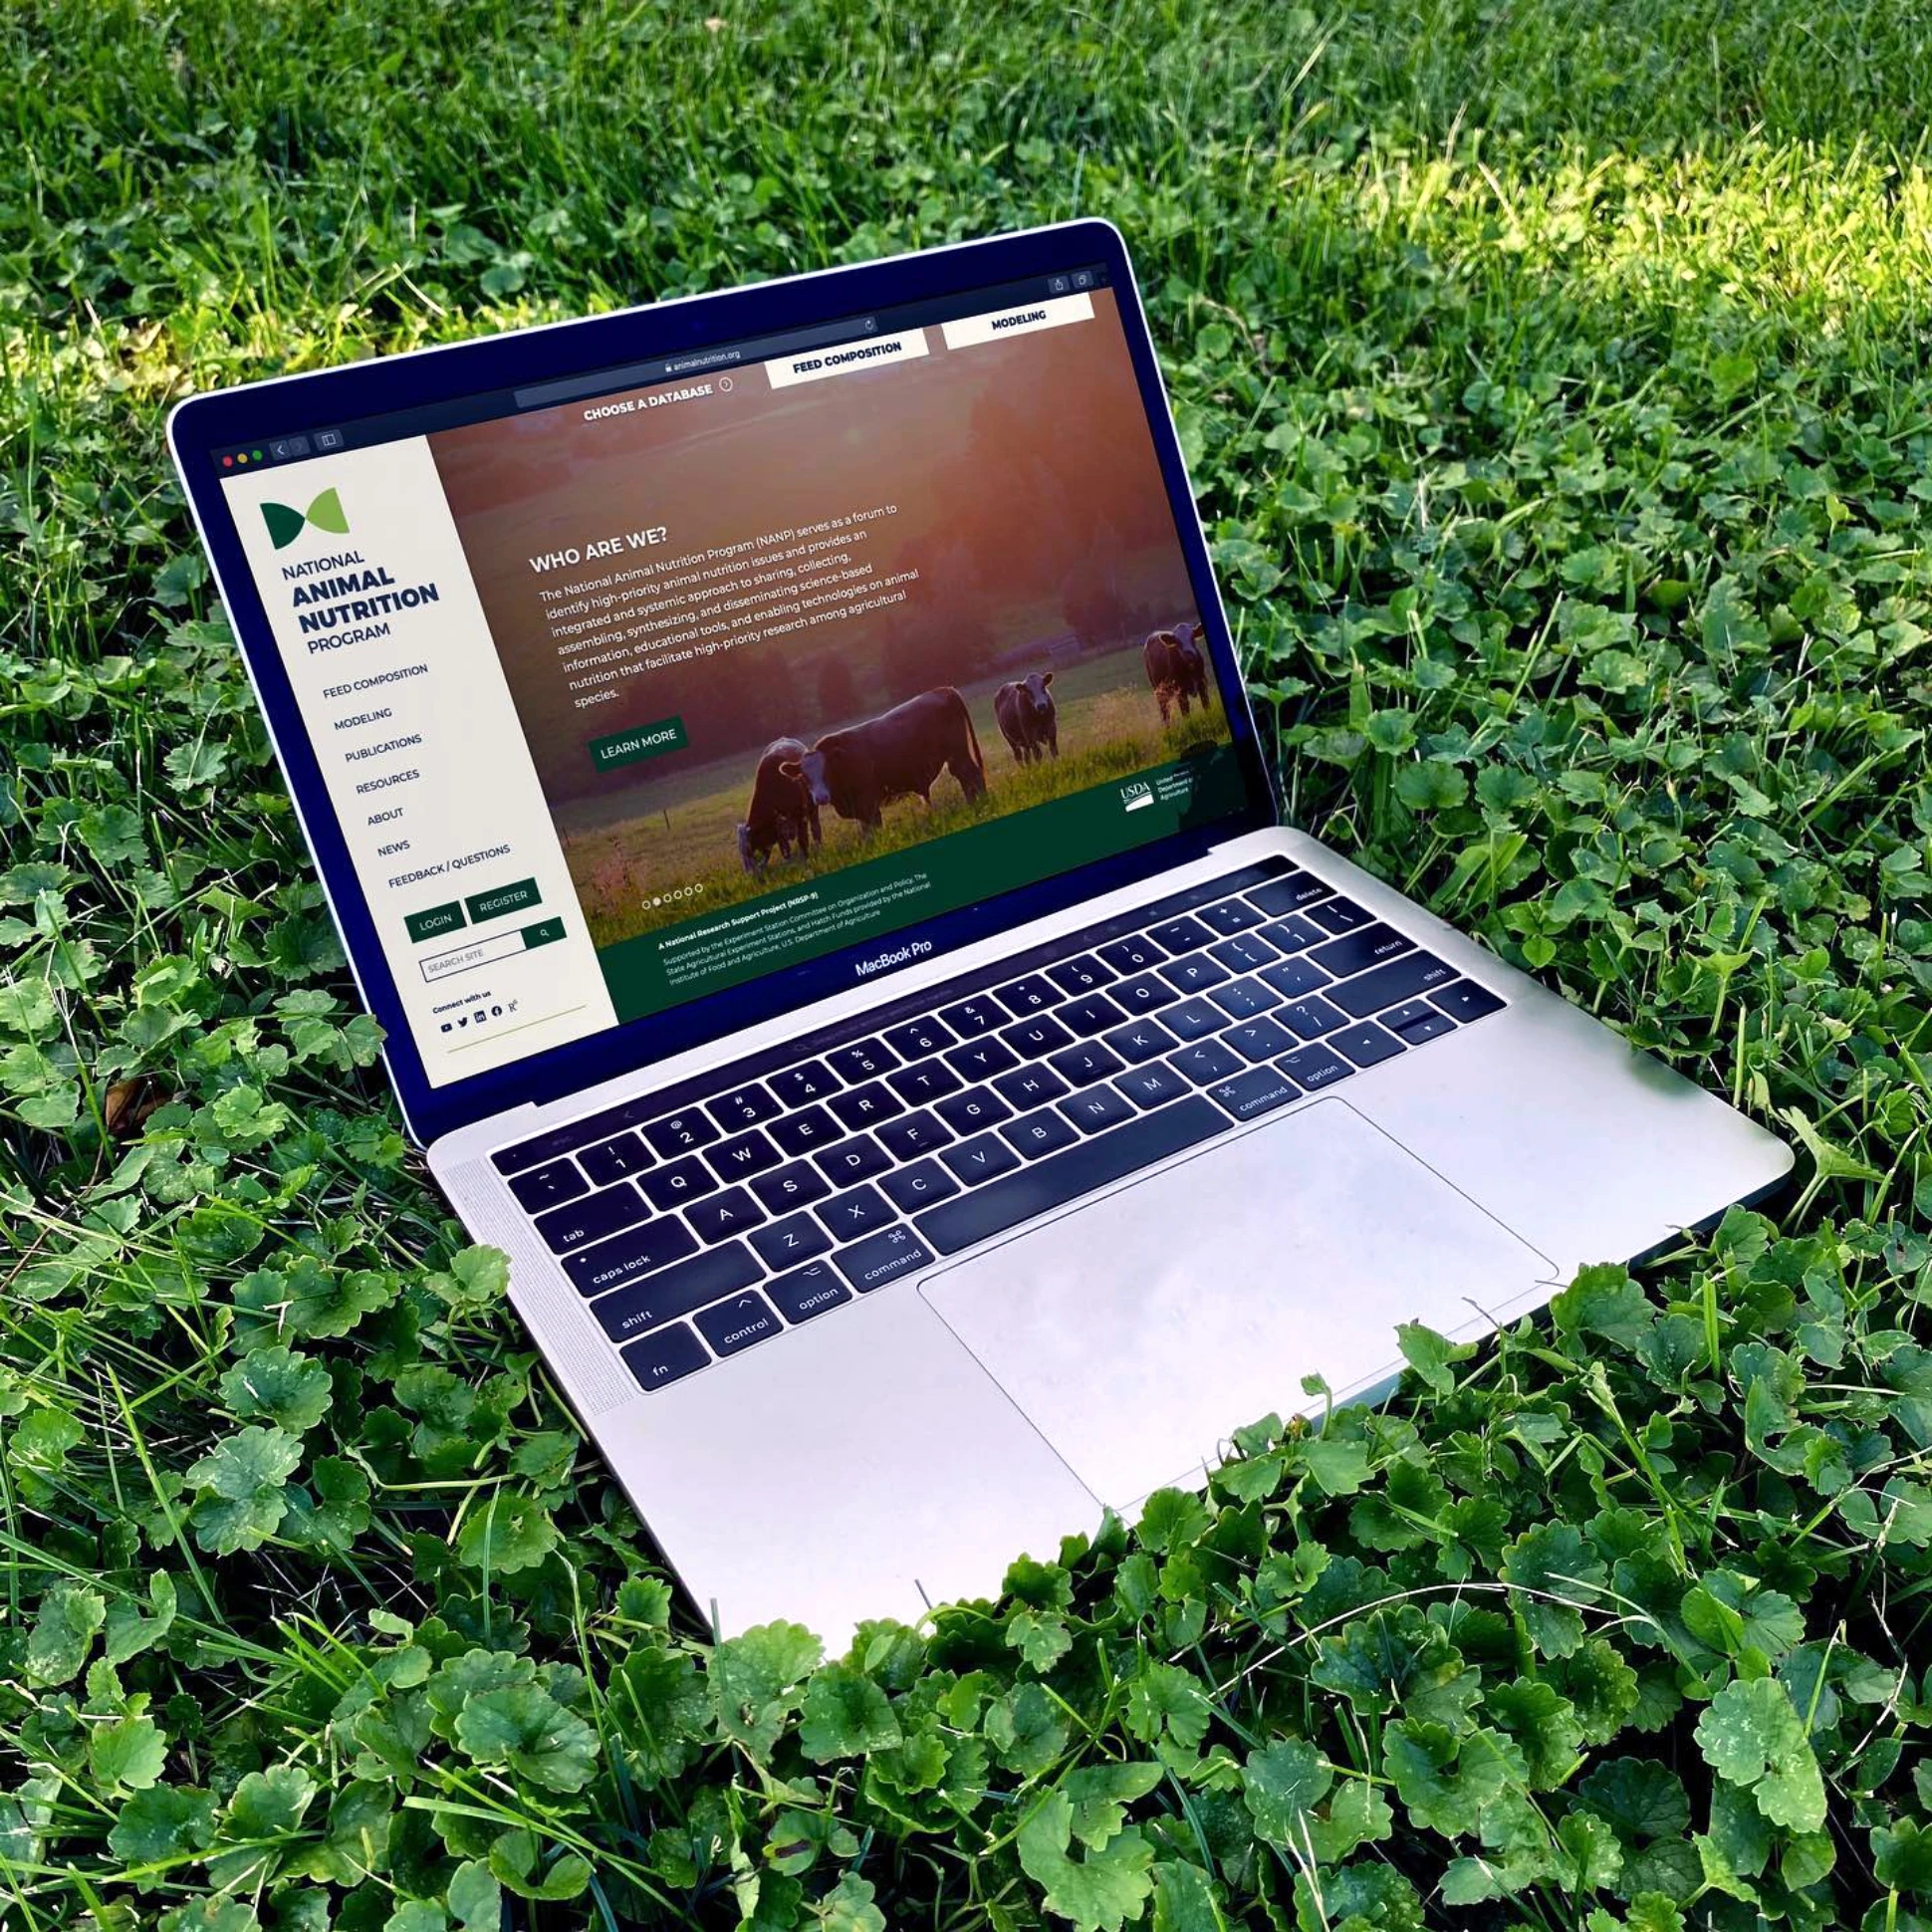 A laptop laying in the grass with a website on it.